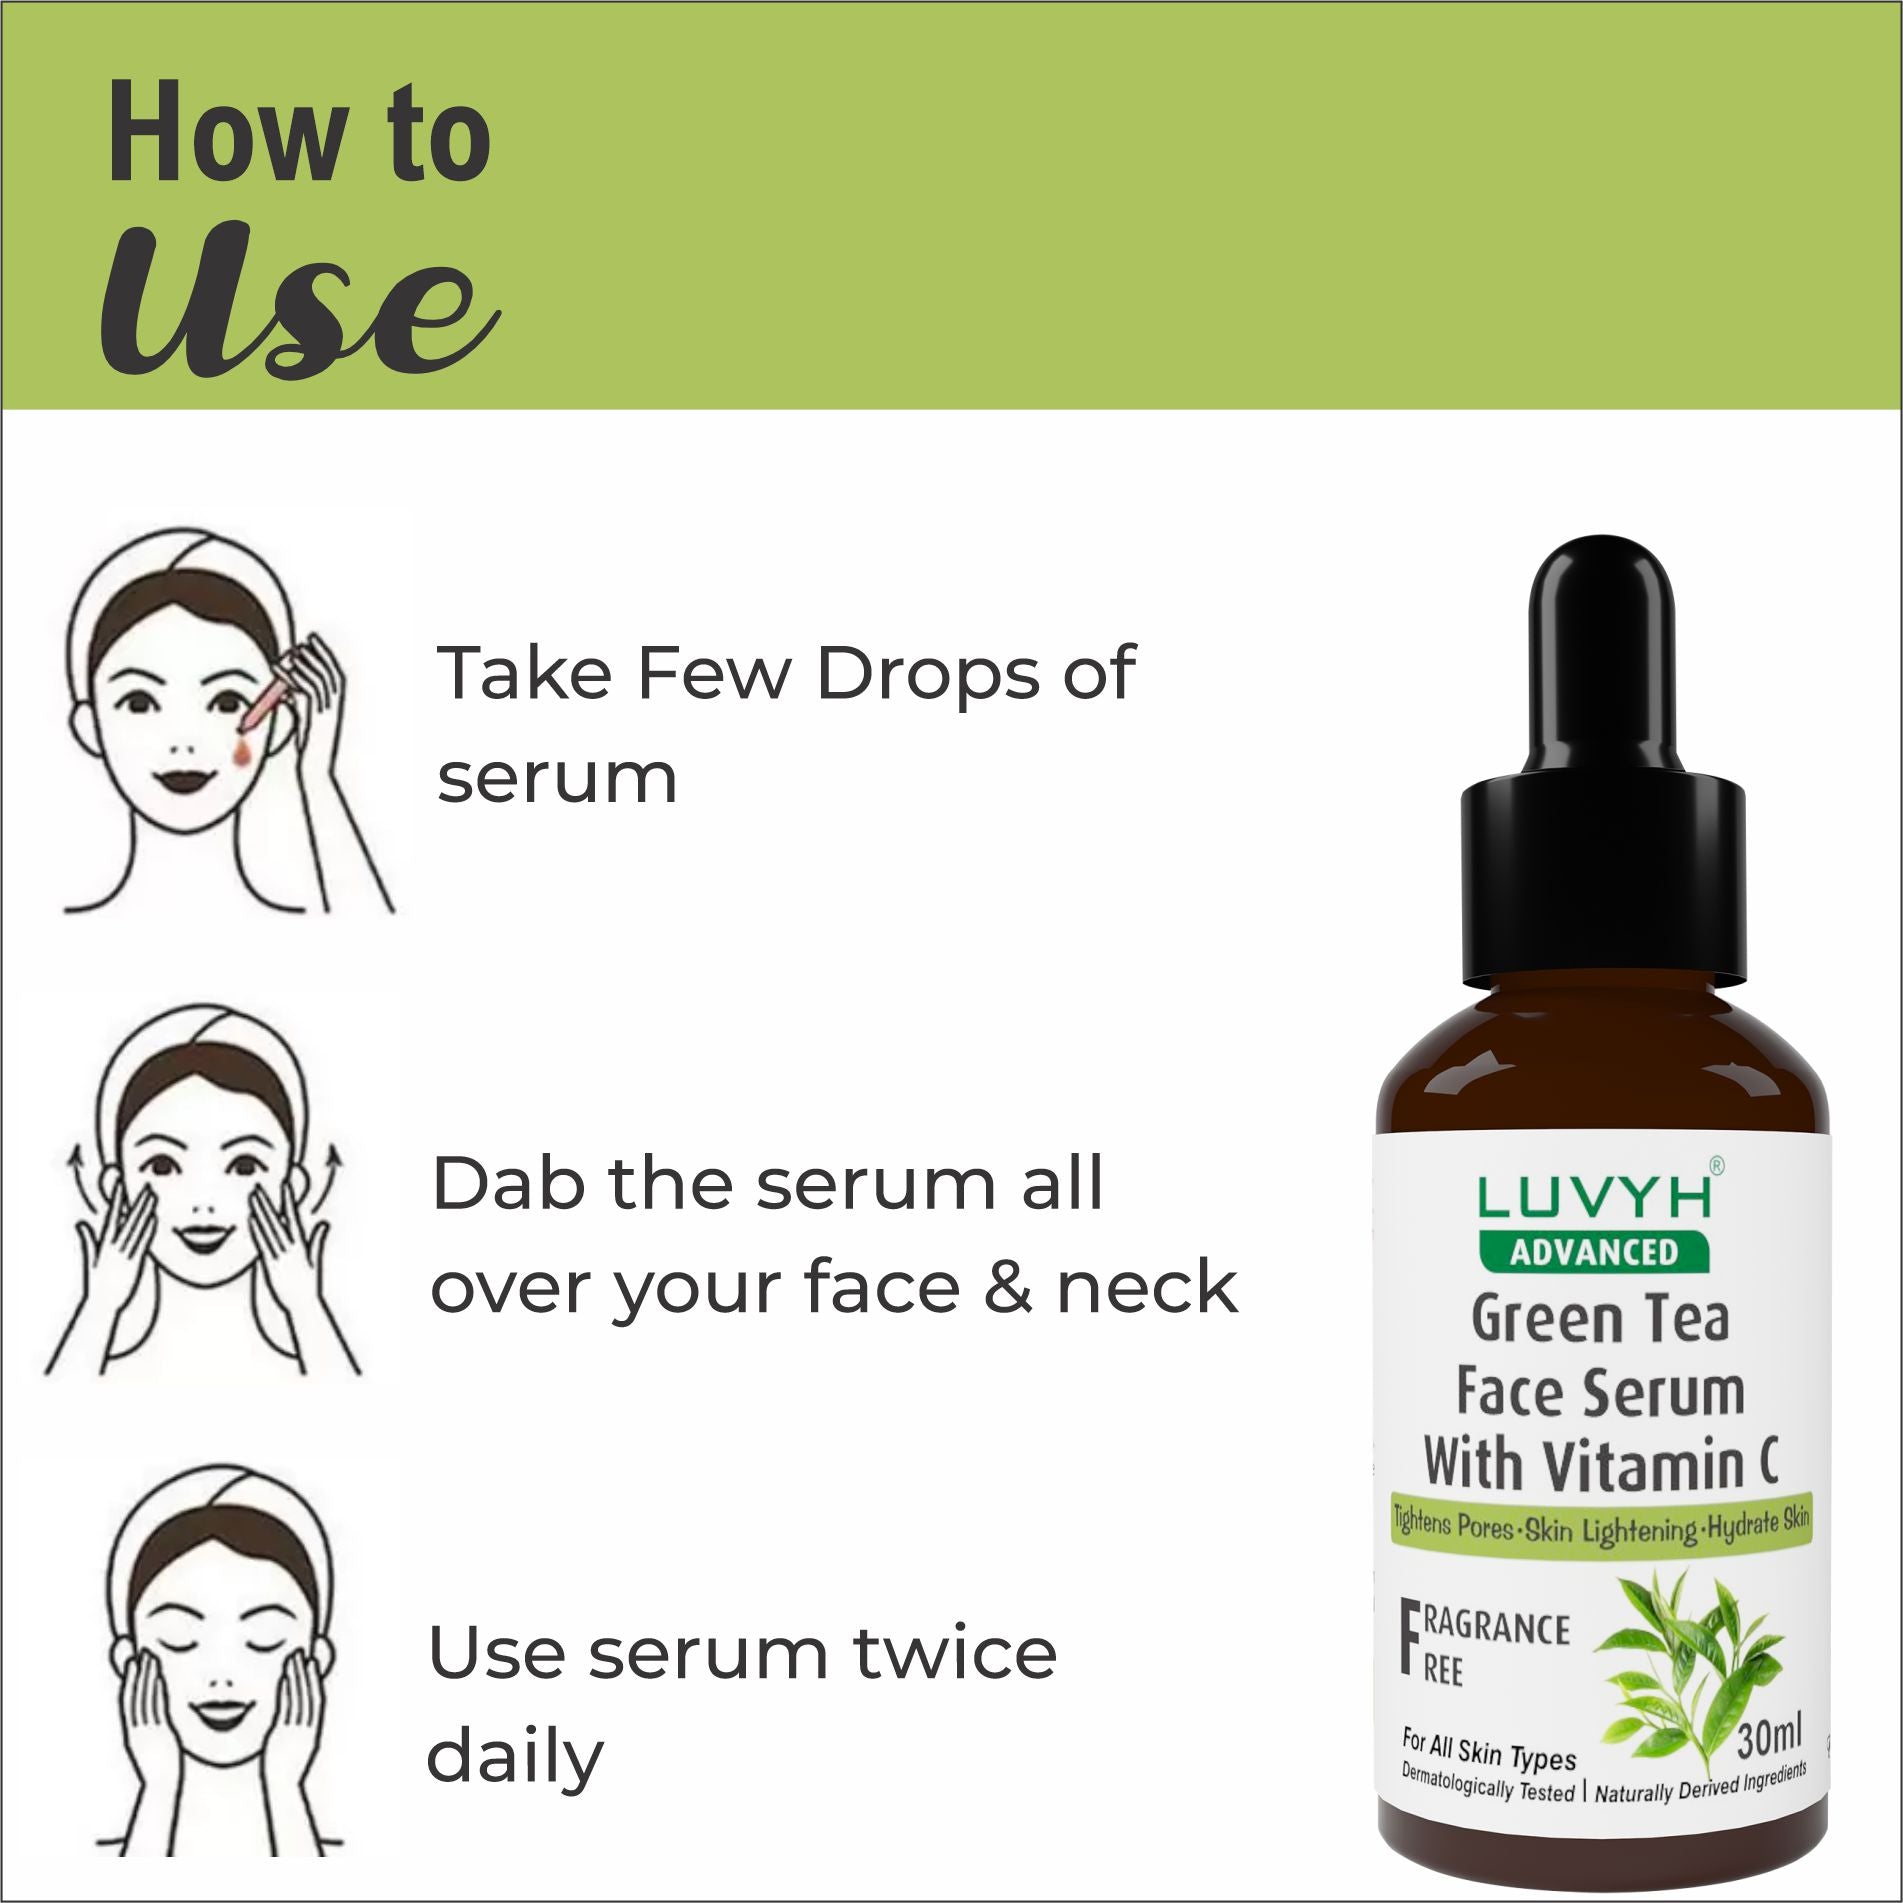 How to use  Green Tea Face Serum With Vitamin C